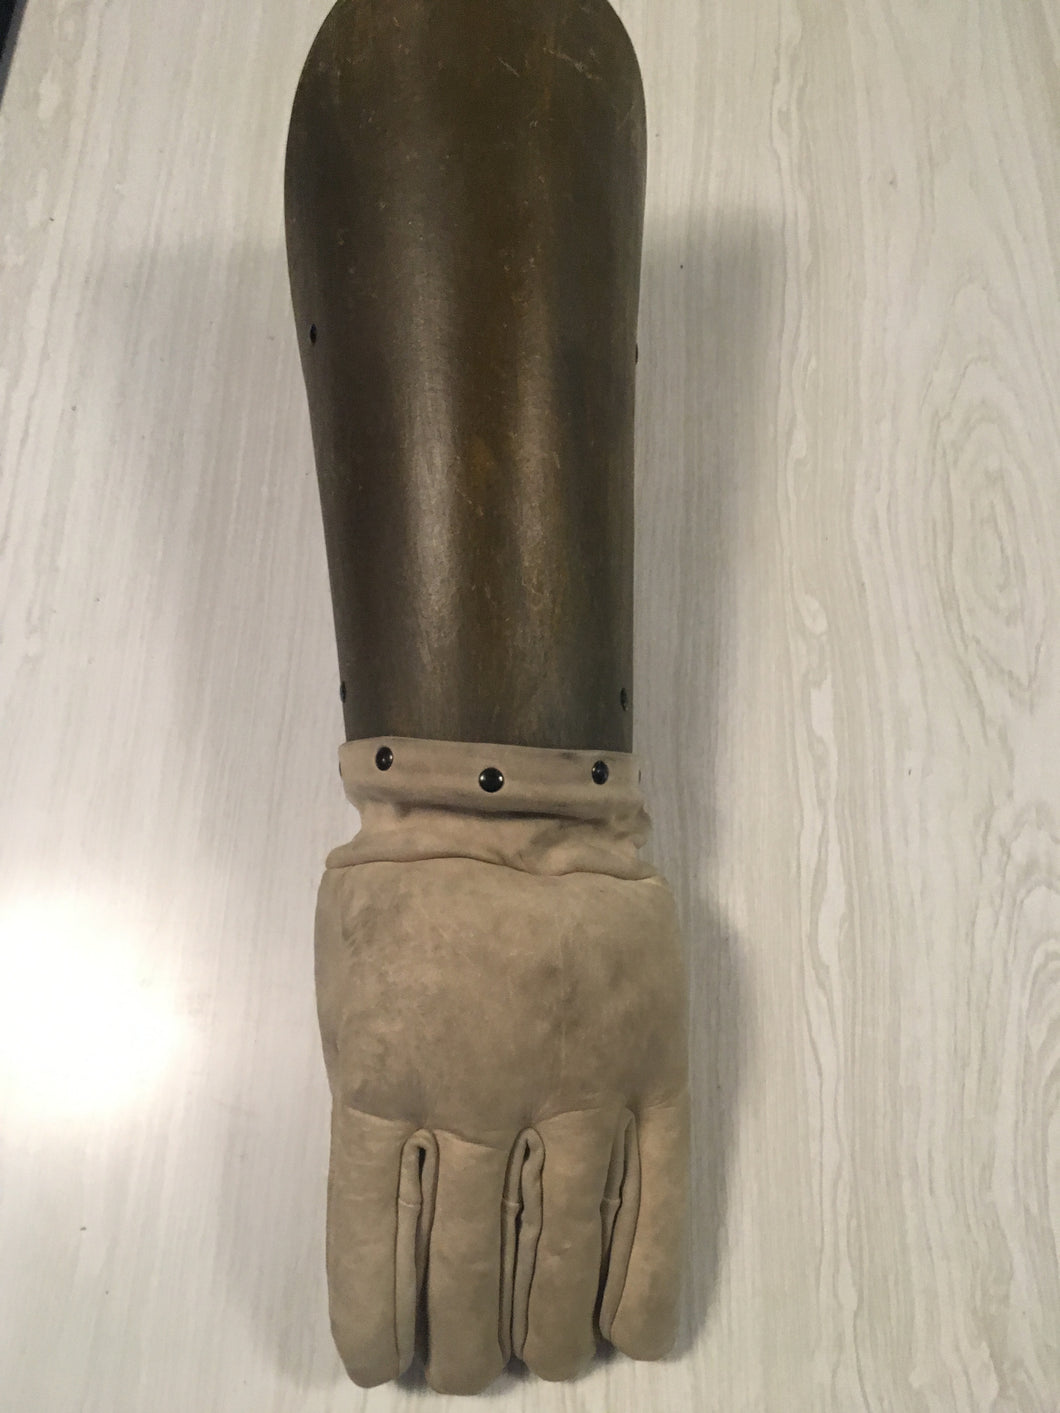 Over 100 YEAR OLD Vintage Early 1900's to WW1 Left Handed Fencing Glove~Used/Good Condition